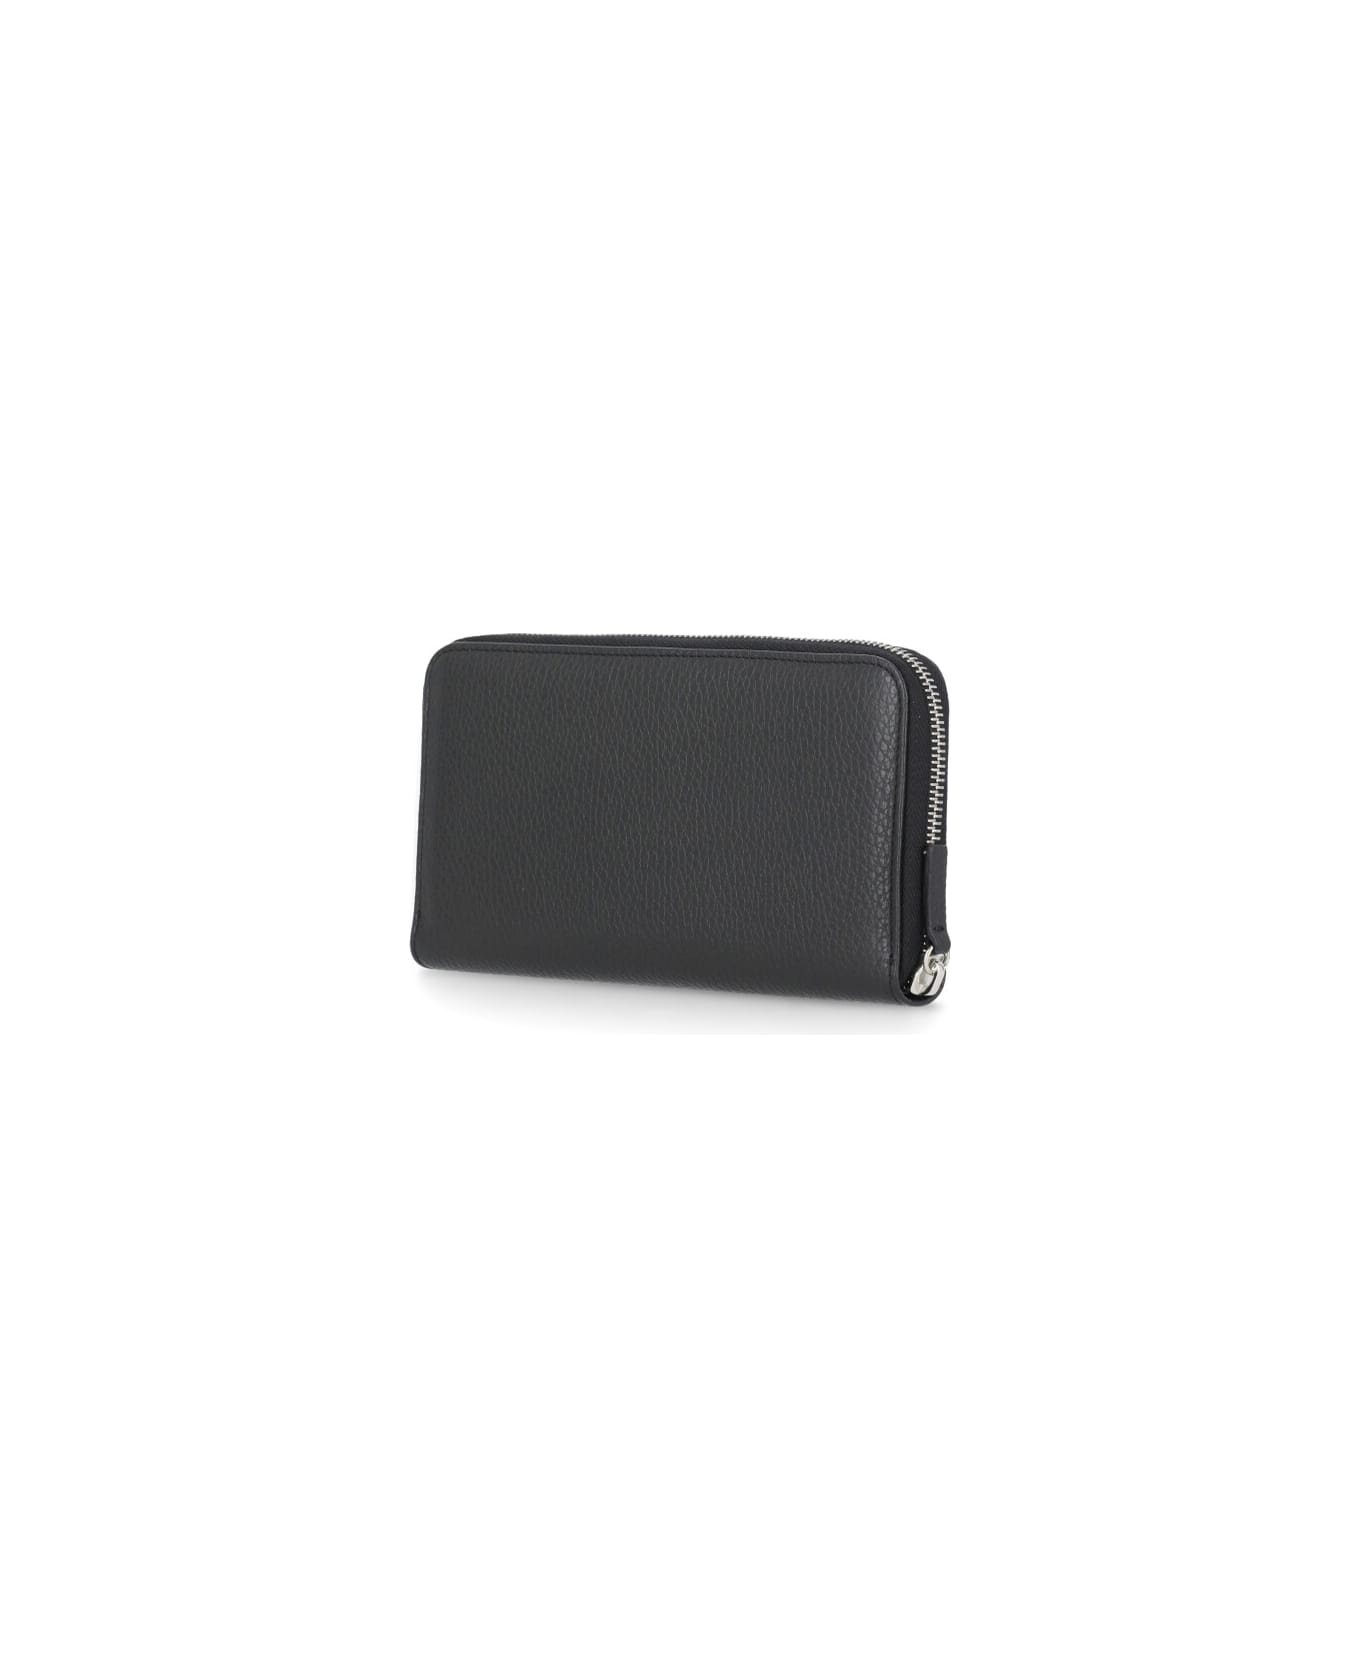 Orciani Micron Leather Wallet - Black